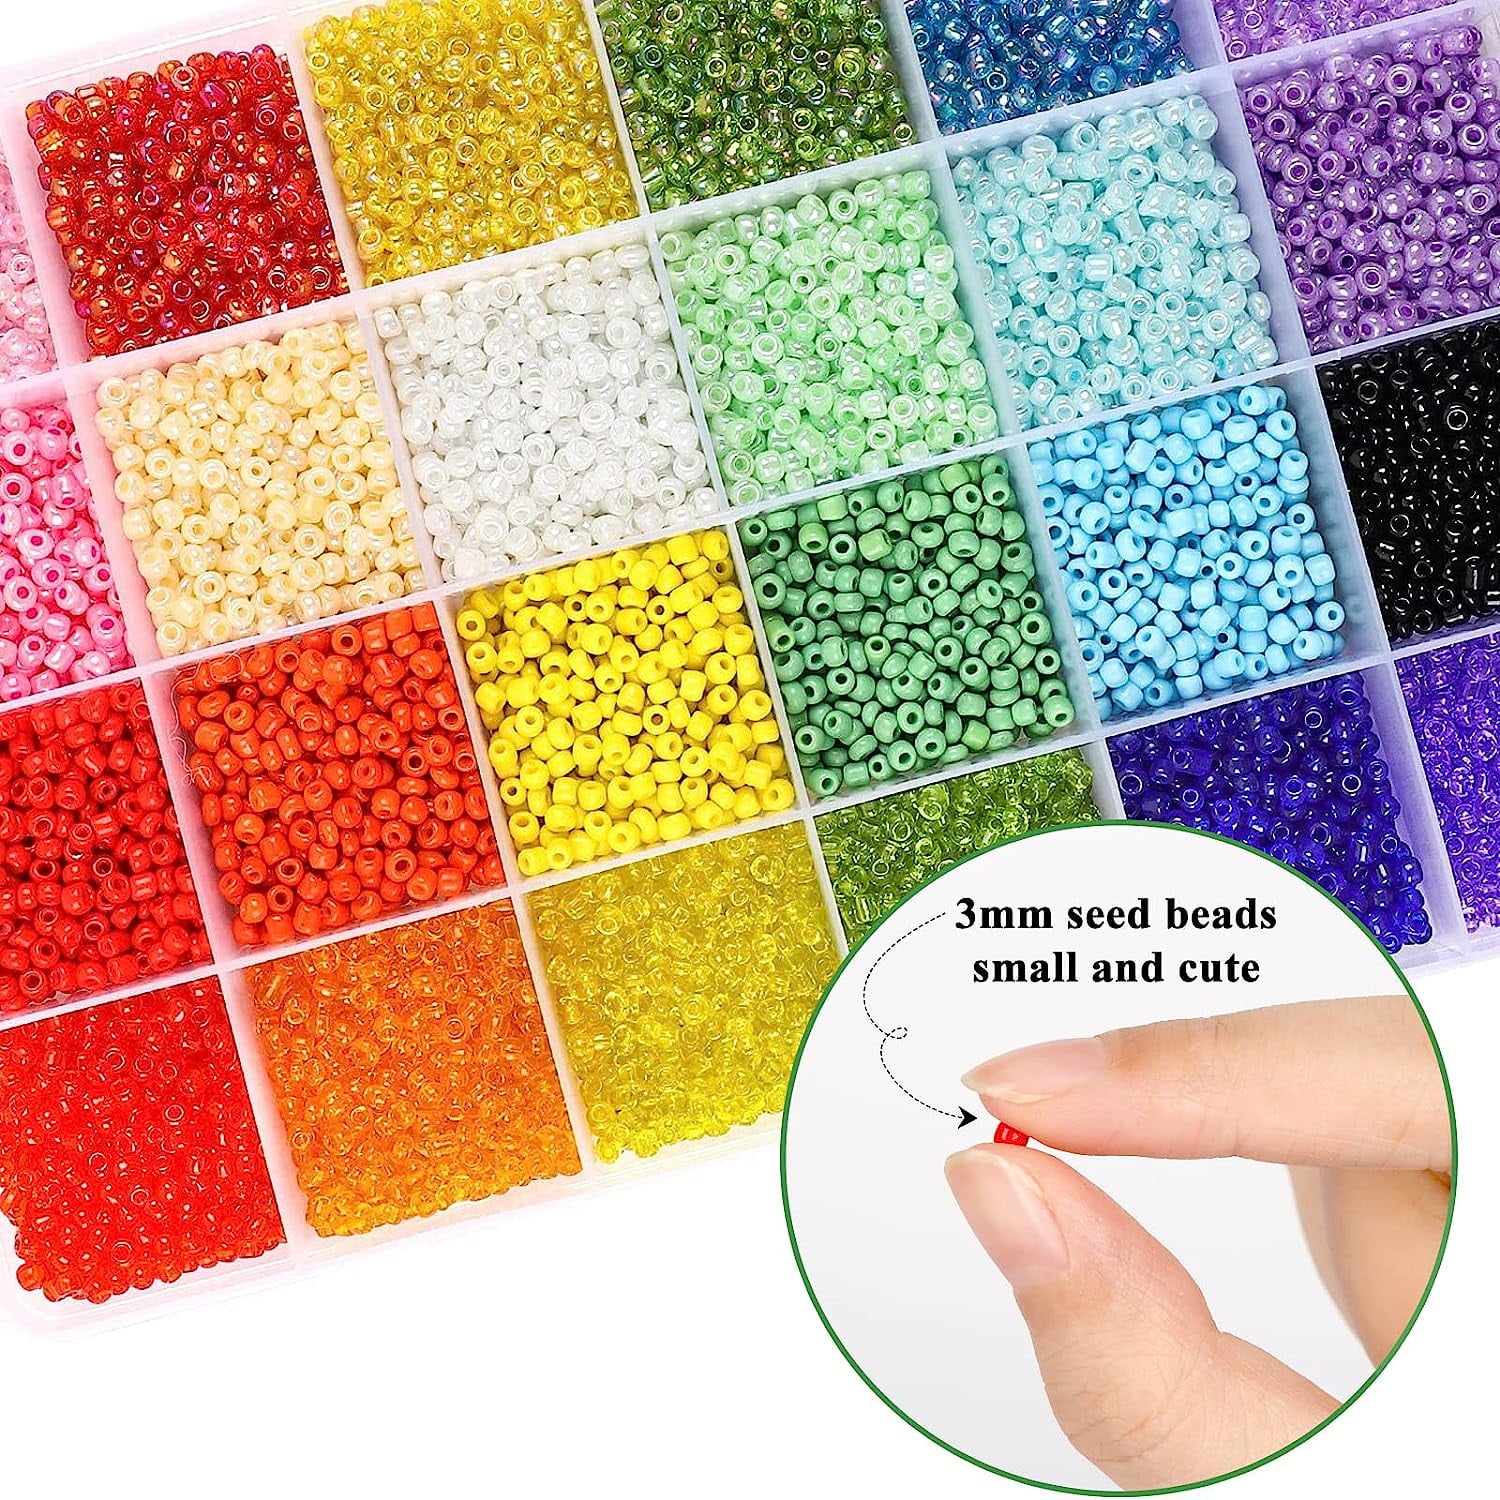 Artsy Crafts 3mm Assorted Glass Seed Beads 6000pcs, 8/0 Mermaid Colors Glow in The Dark Beads Spacer Beads for Jewelry Making Bracelets Necklace